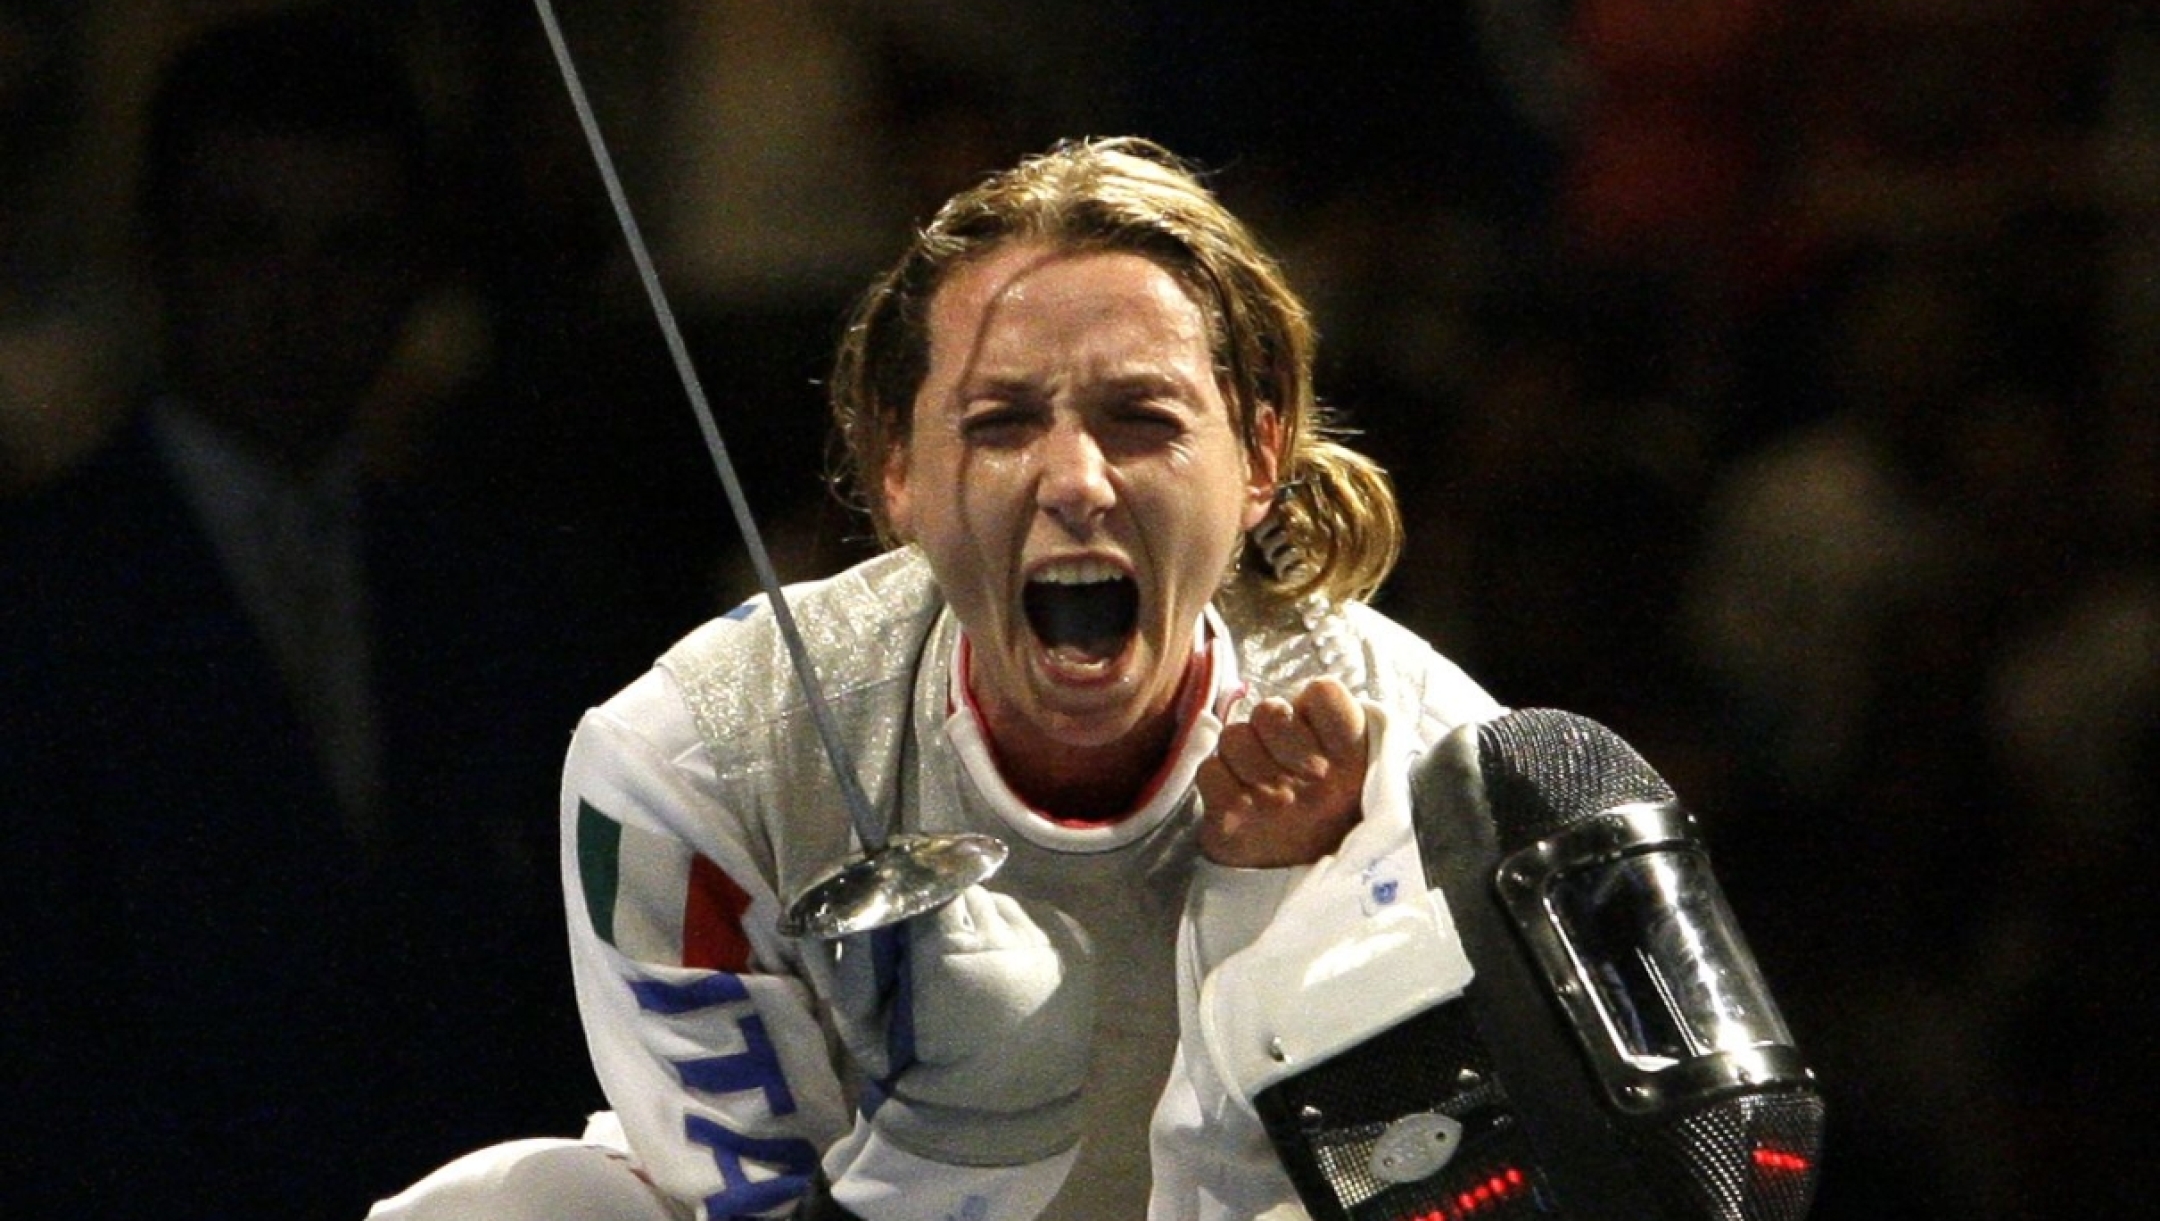 Italy's Valentina Vezzali reacts after defeating Korea's Nam Hyunhee  in the gold medal competition in the women's individual foil fencing event Monday, Aug. 11, 2008, at the 2008 Olympics in Beijing. Vezzali won the gold. (AP Photo/Elaine Thompson)